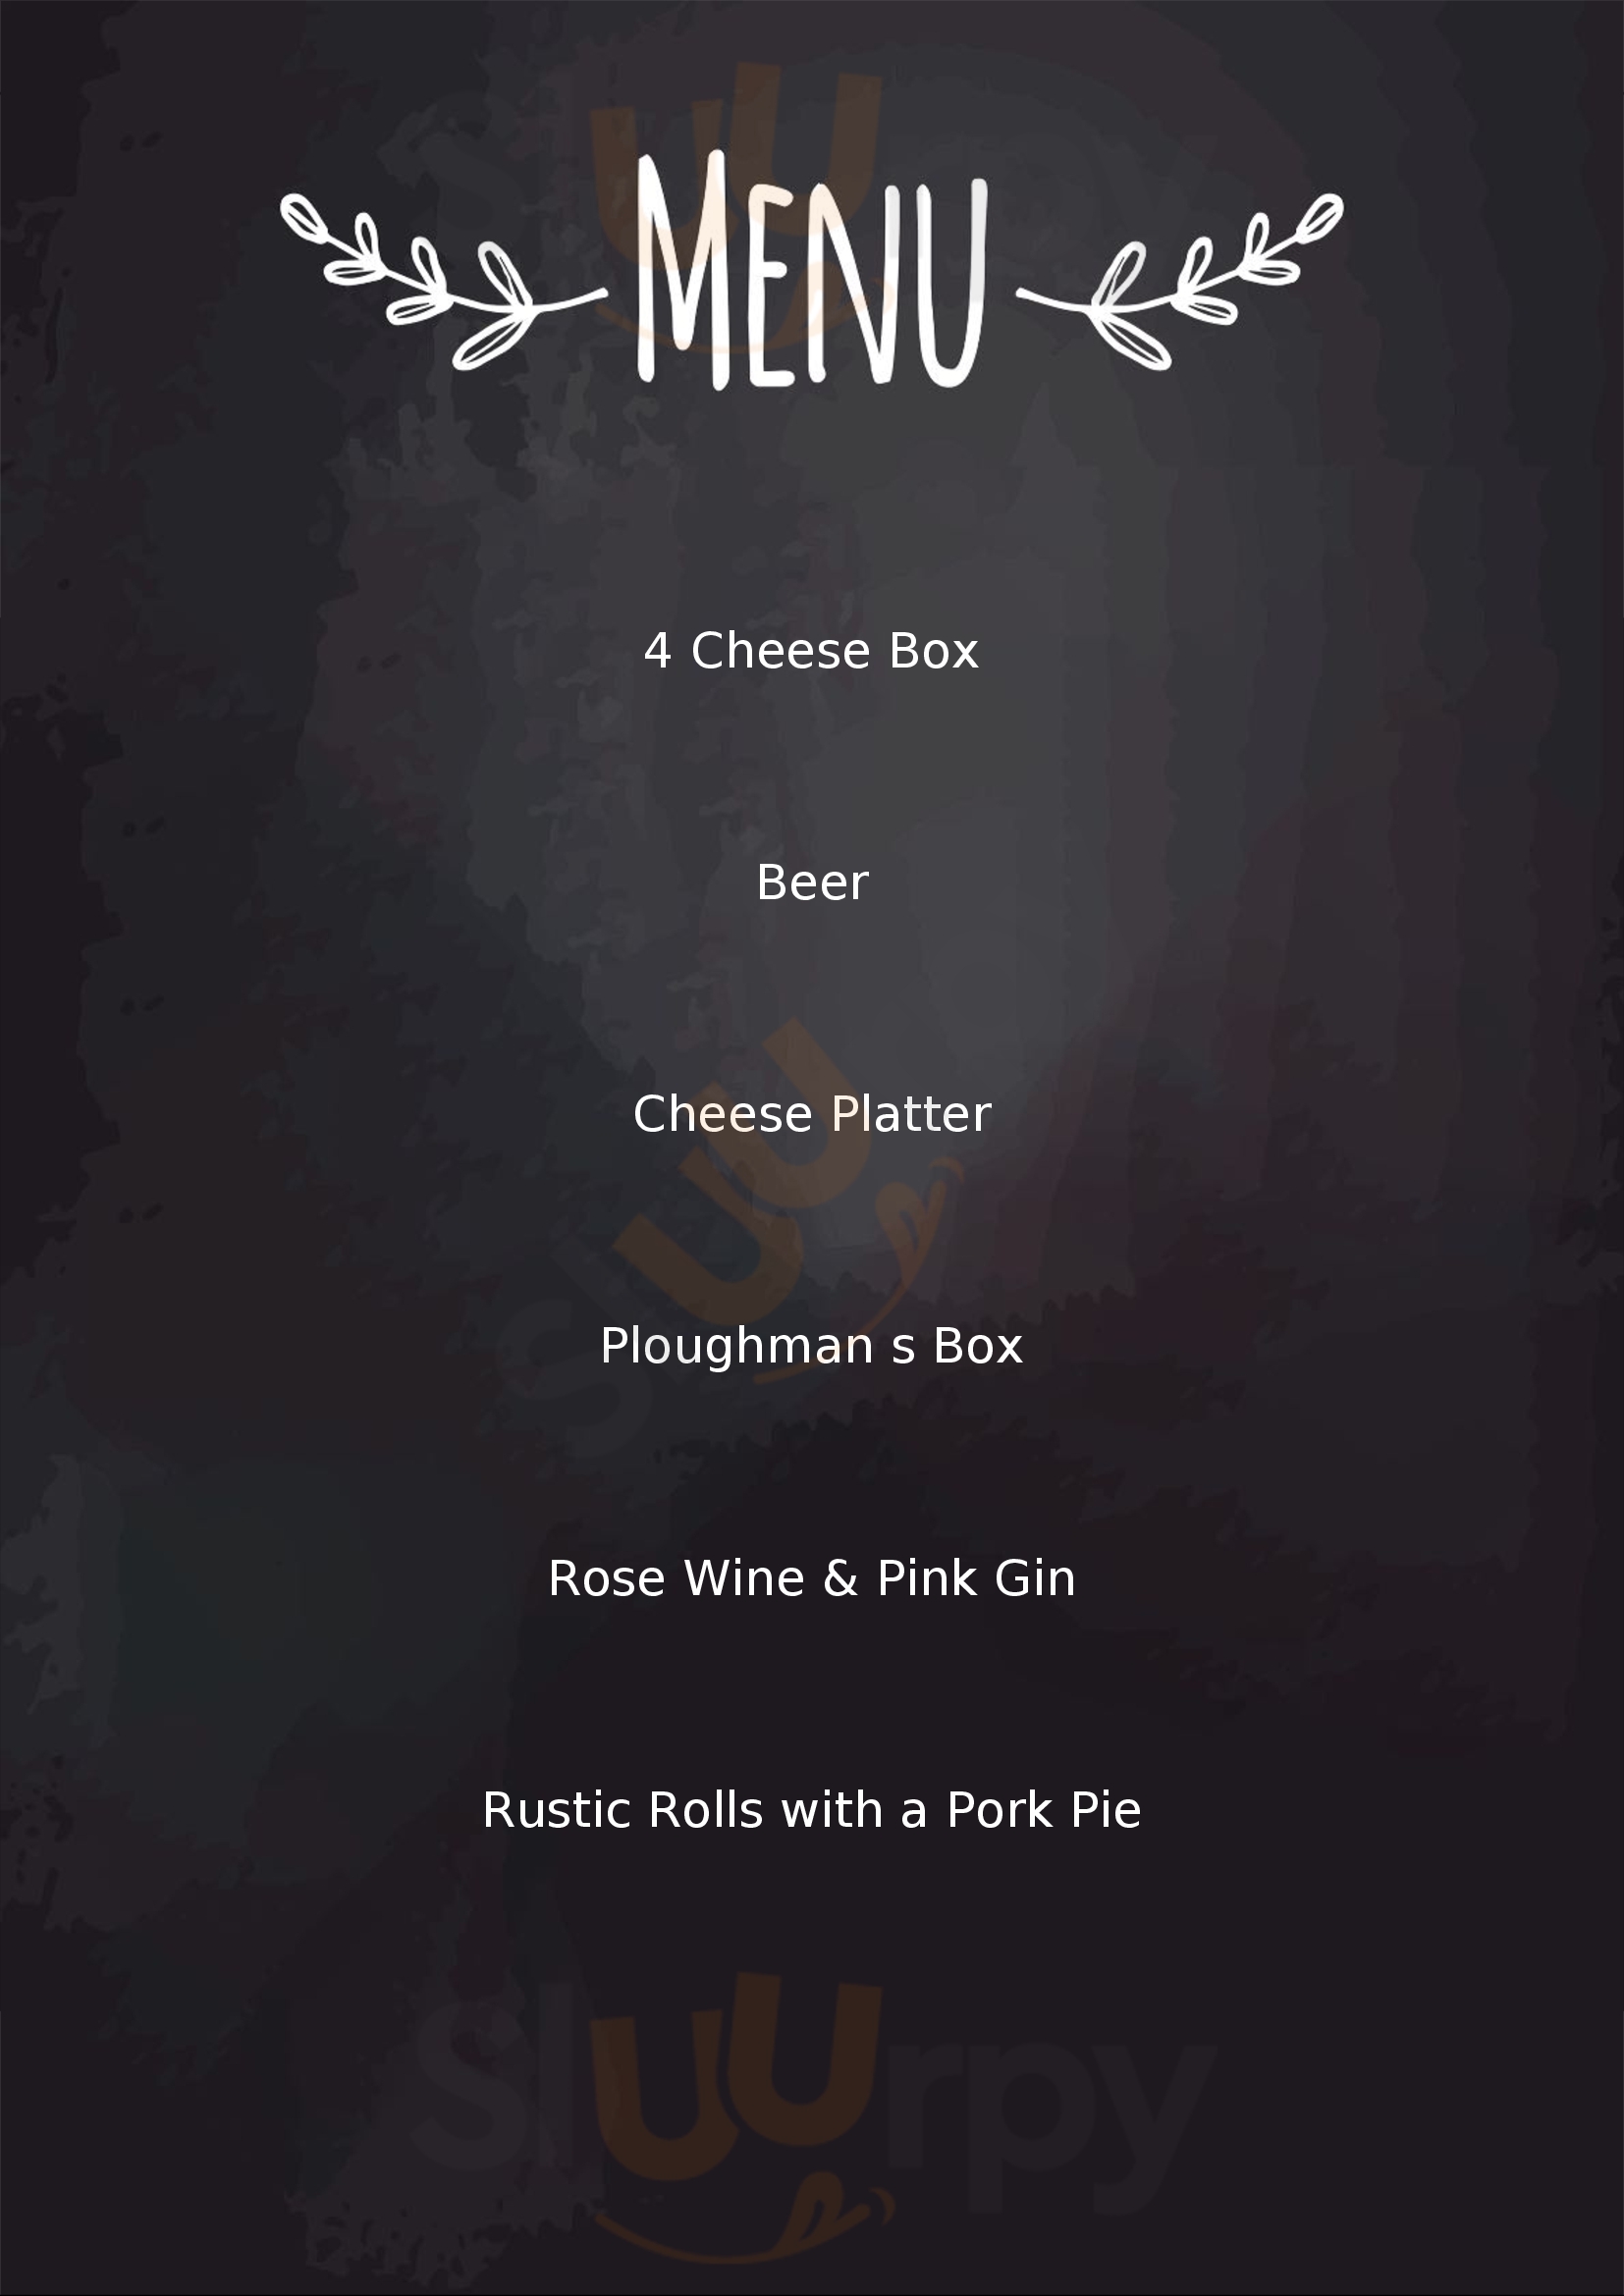 The Final Whistle Southwell Menu - 1